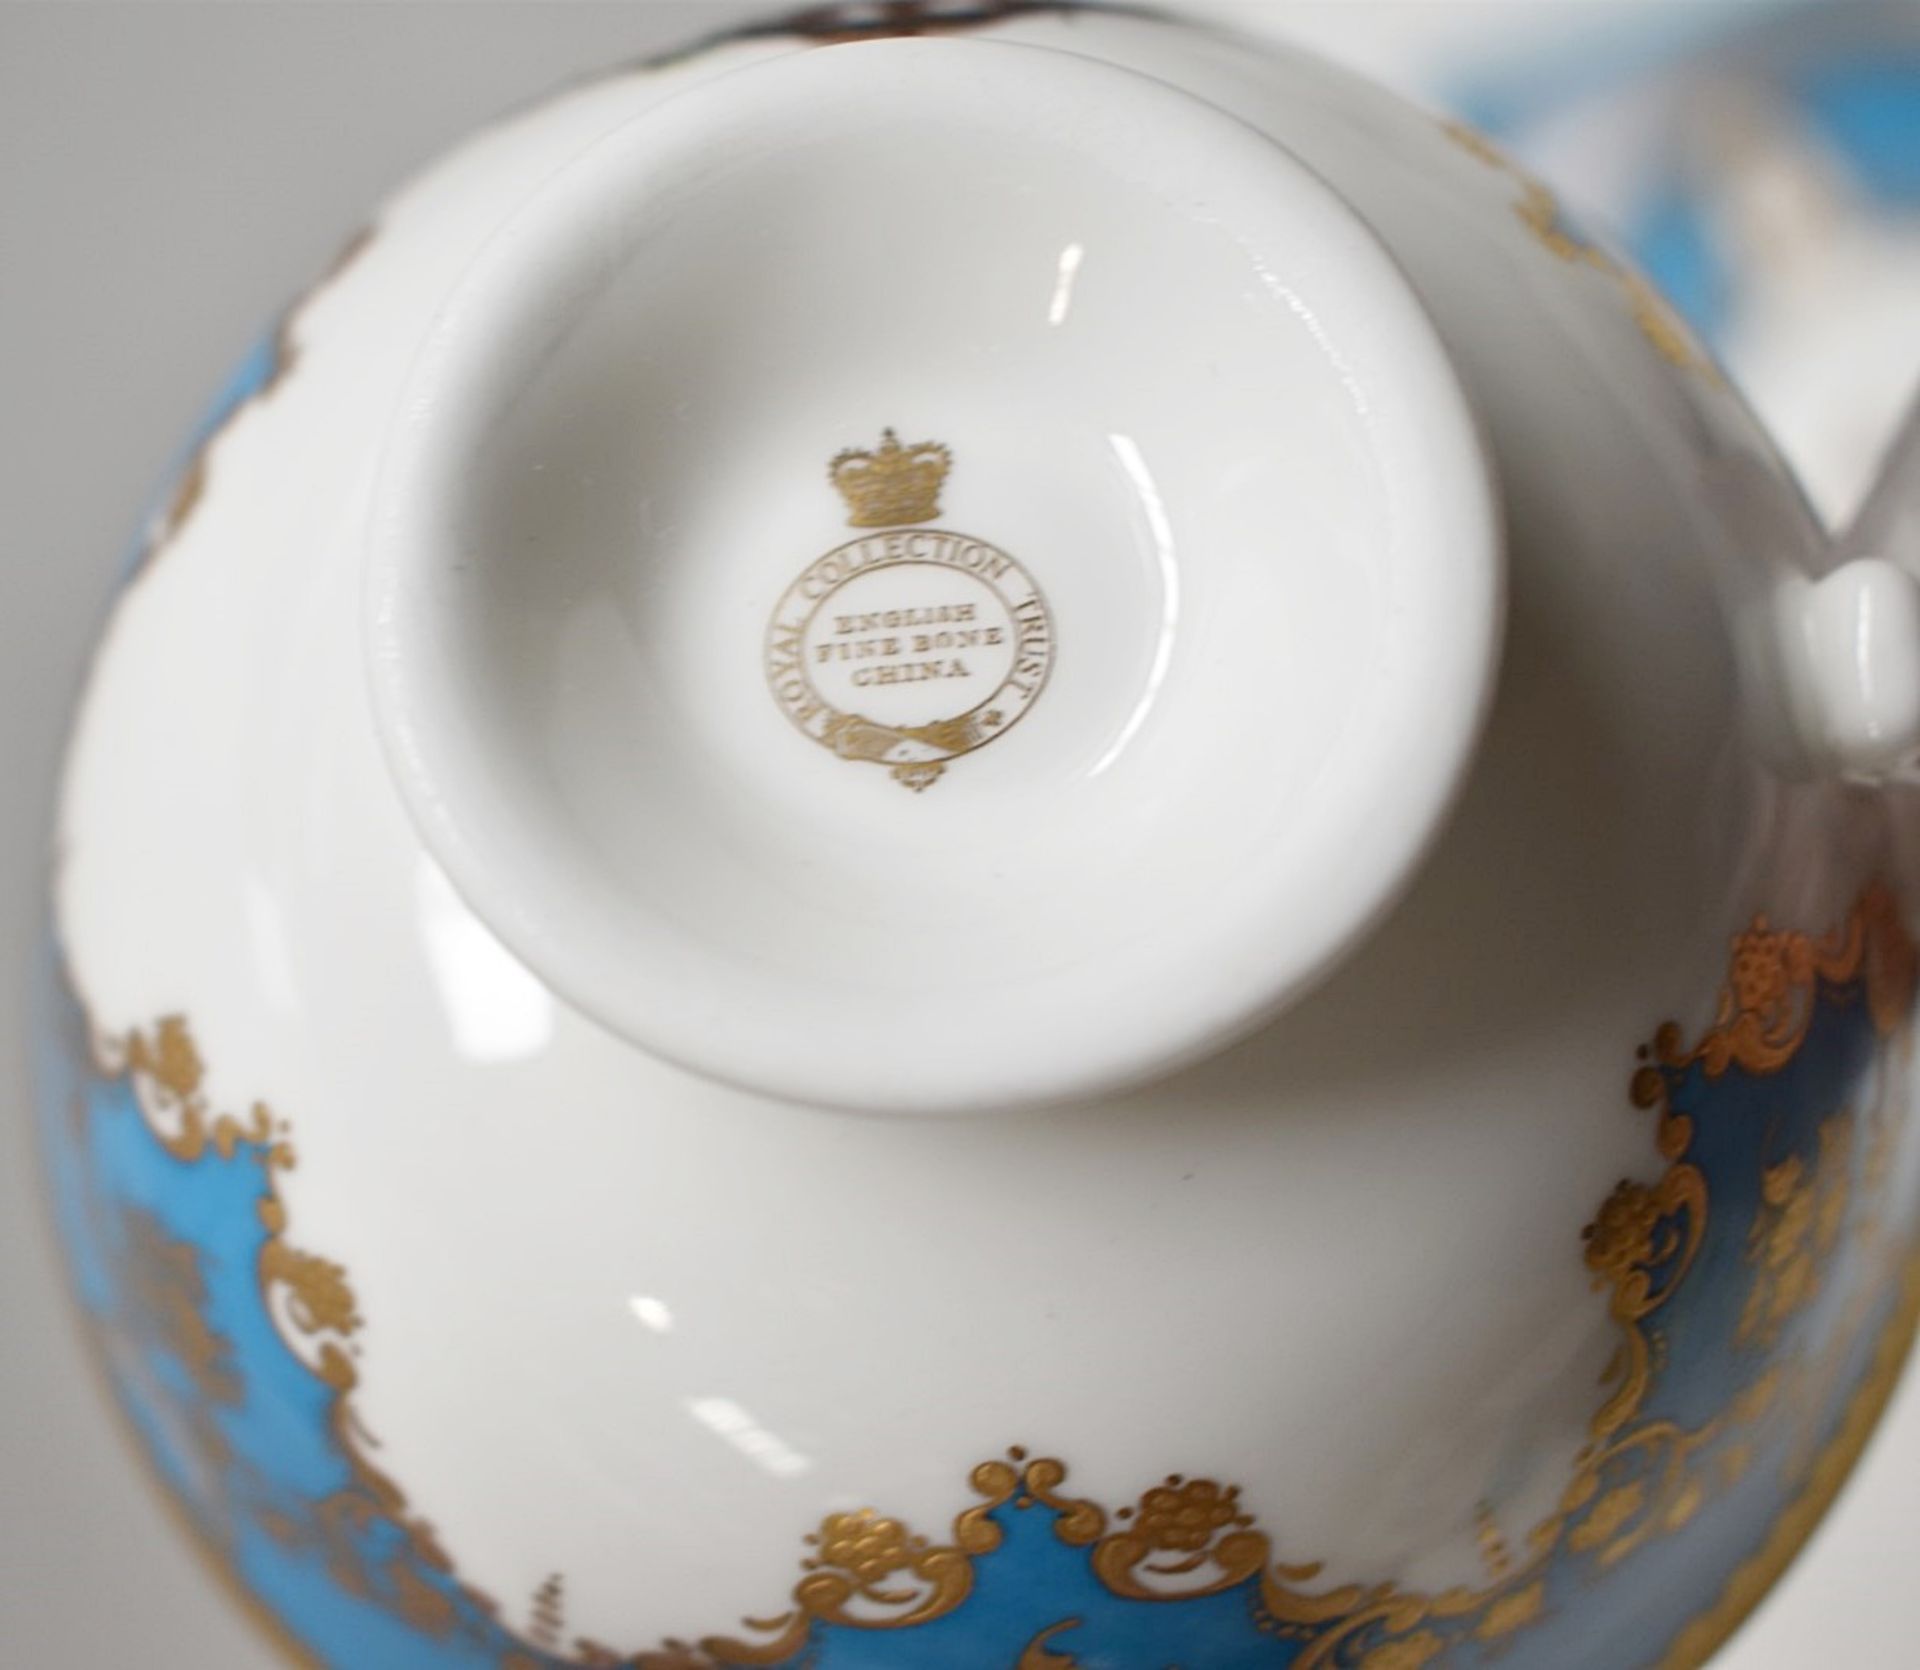 1 x ROYAL COLLECTION TRUST 'Coat of Arms' Fine Bone China Teacup and Saucer Set, Hand finished - Image 7 of 9